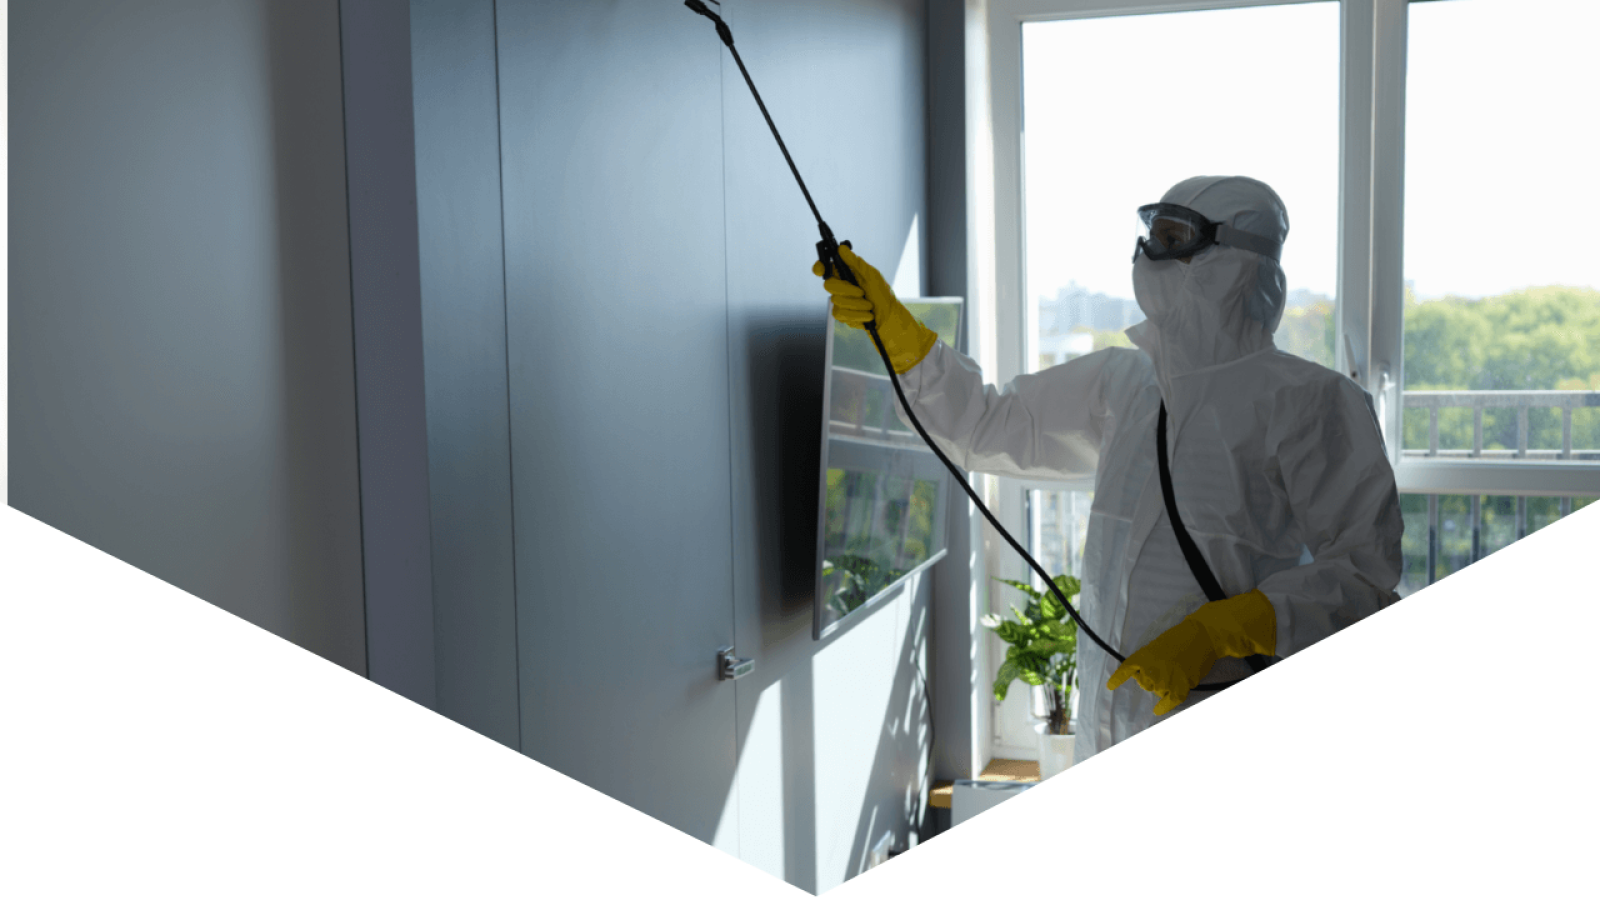 Harbour Hazmat provides mold remediation services, hazmat cleaner use cleaning equipment on house